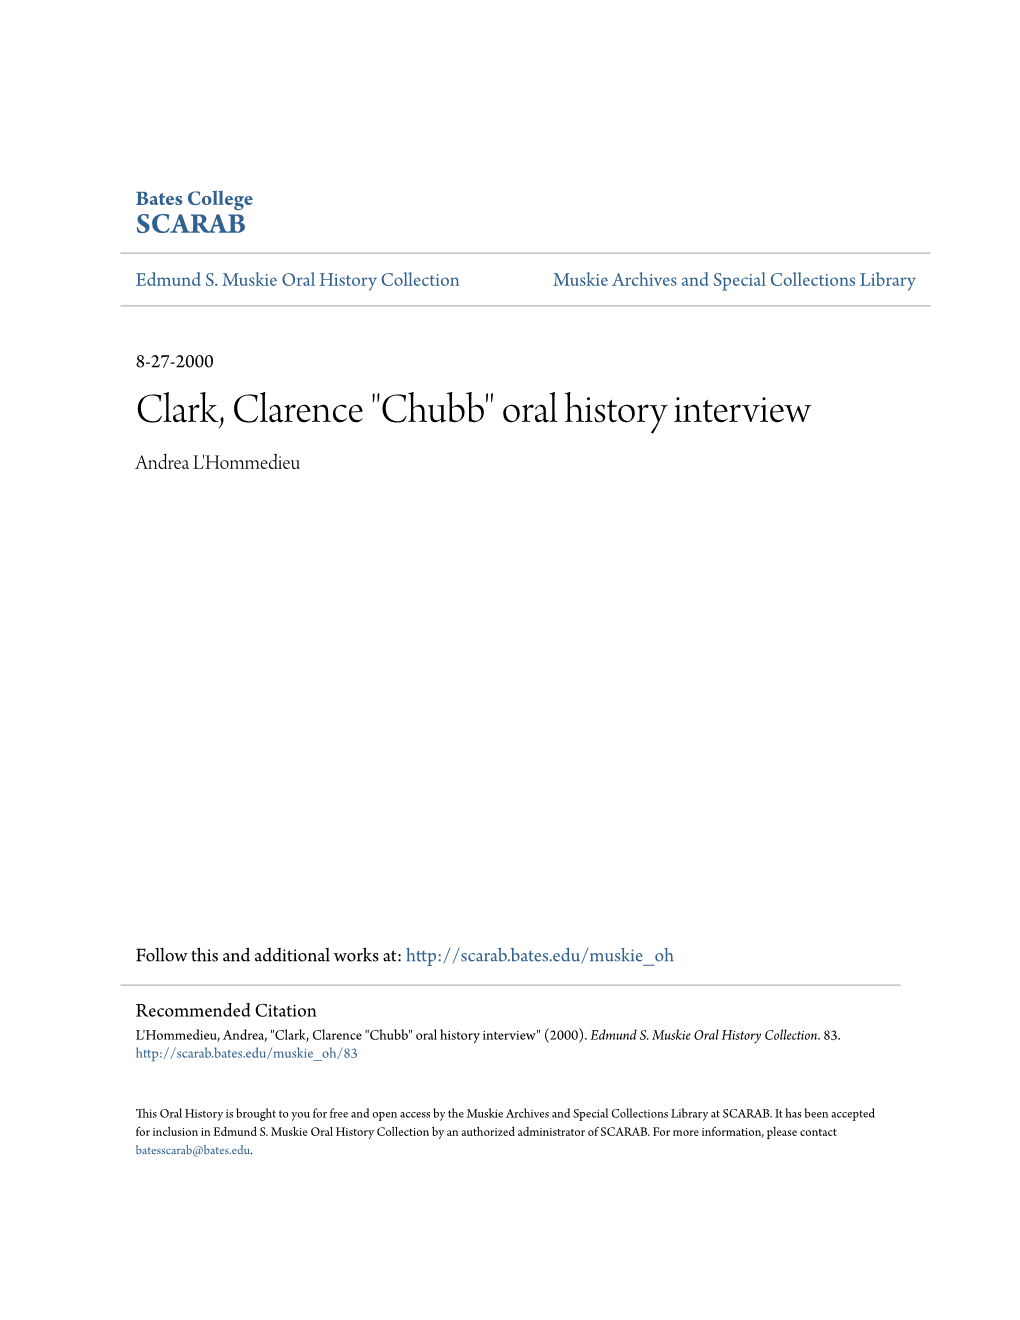 Clark, Clarence "Chubb" Oral History Interview Andrea L'hommedieu